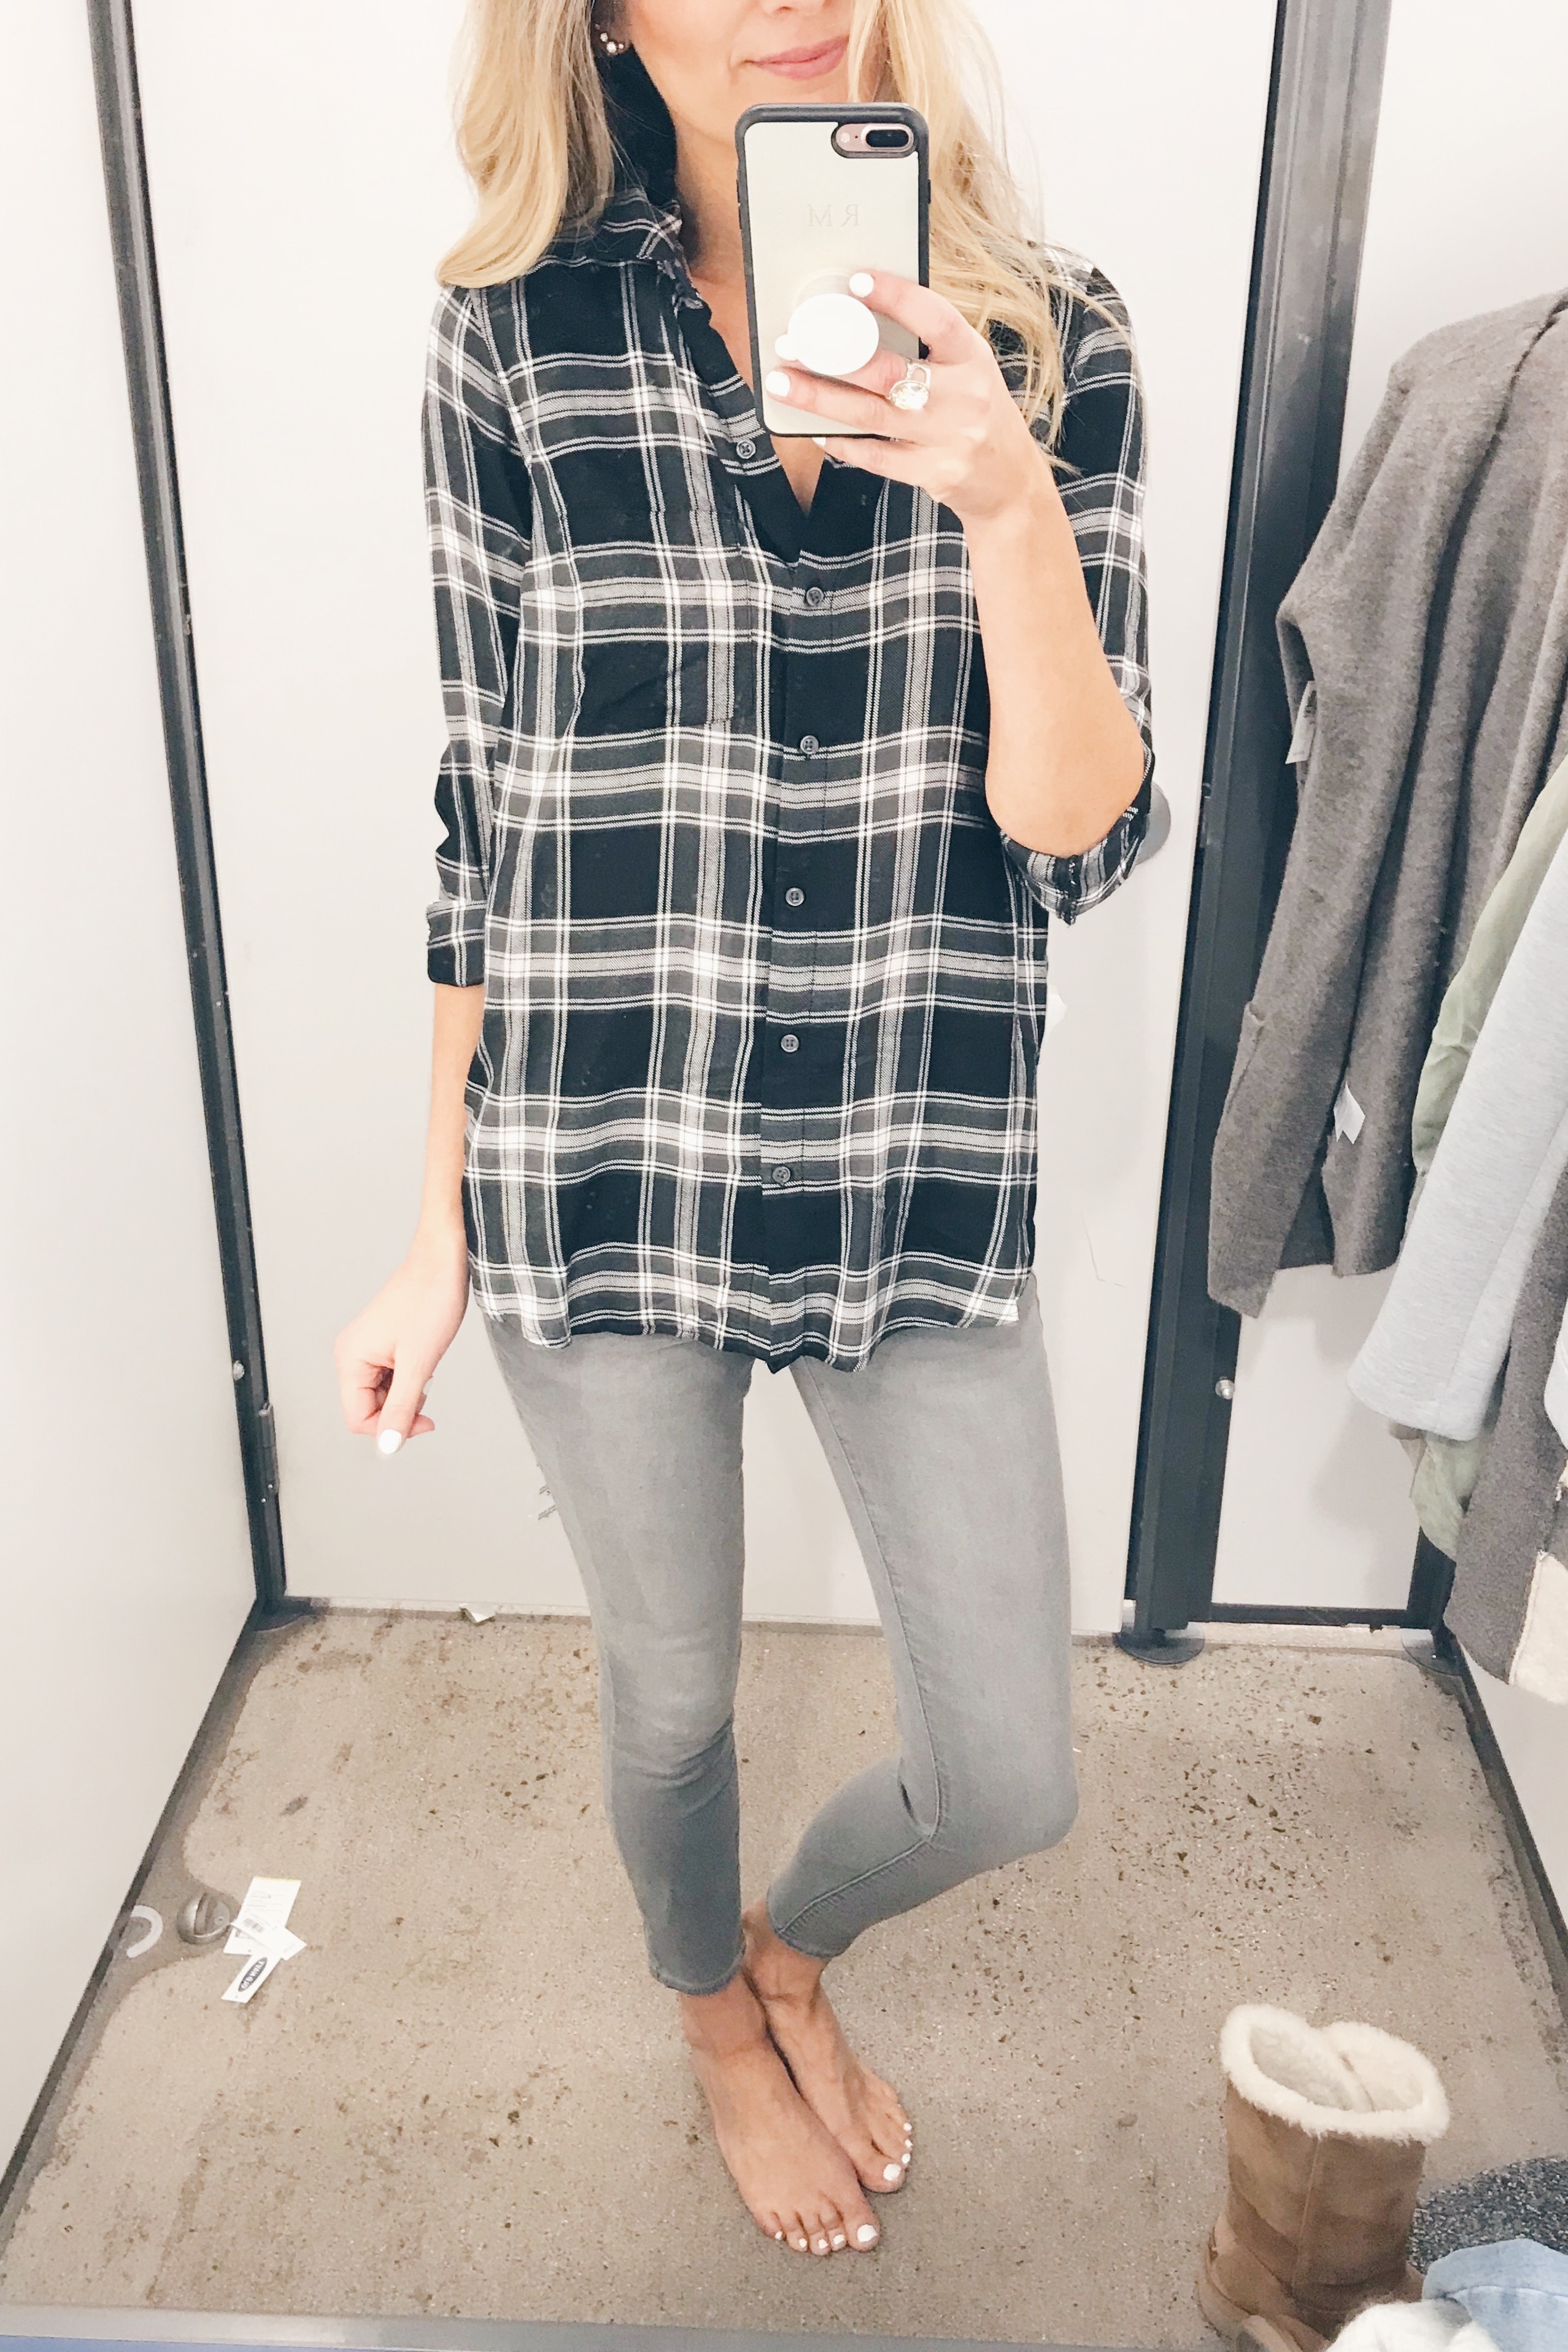 old navy friends and family sale try on - black and white plaid shirt with gray skinny jeans